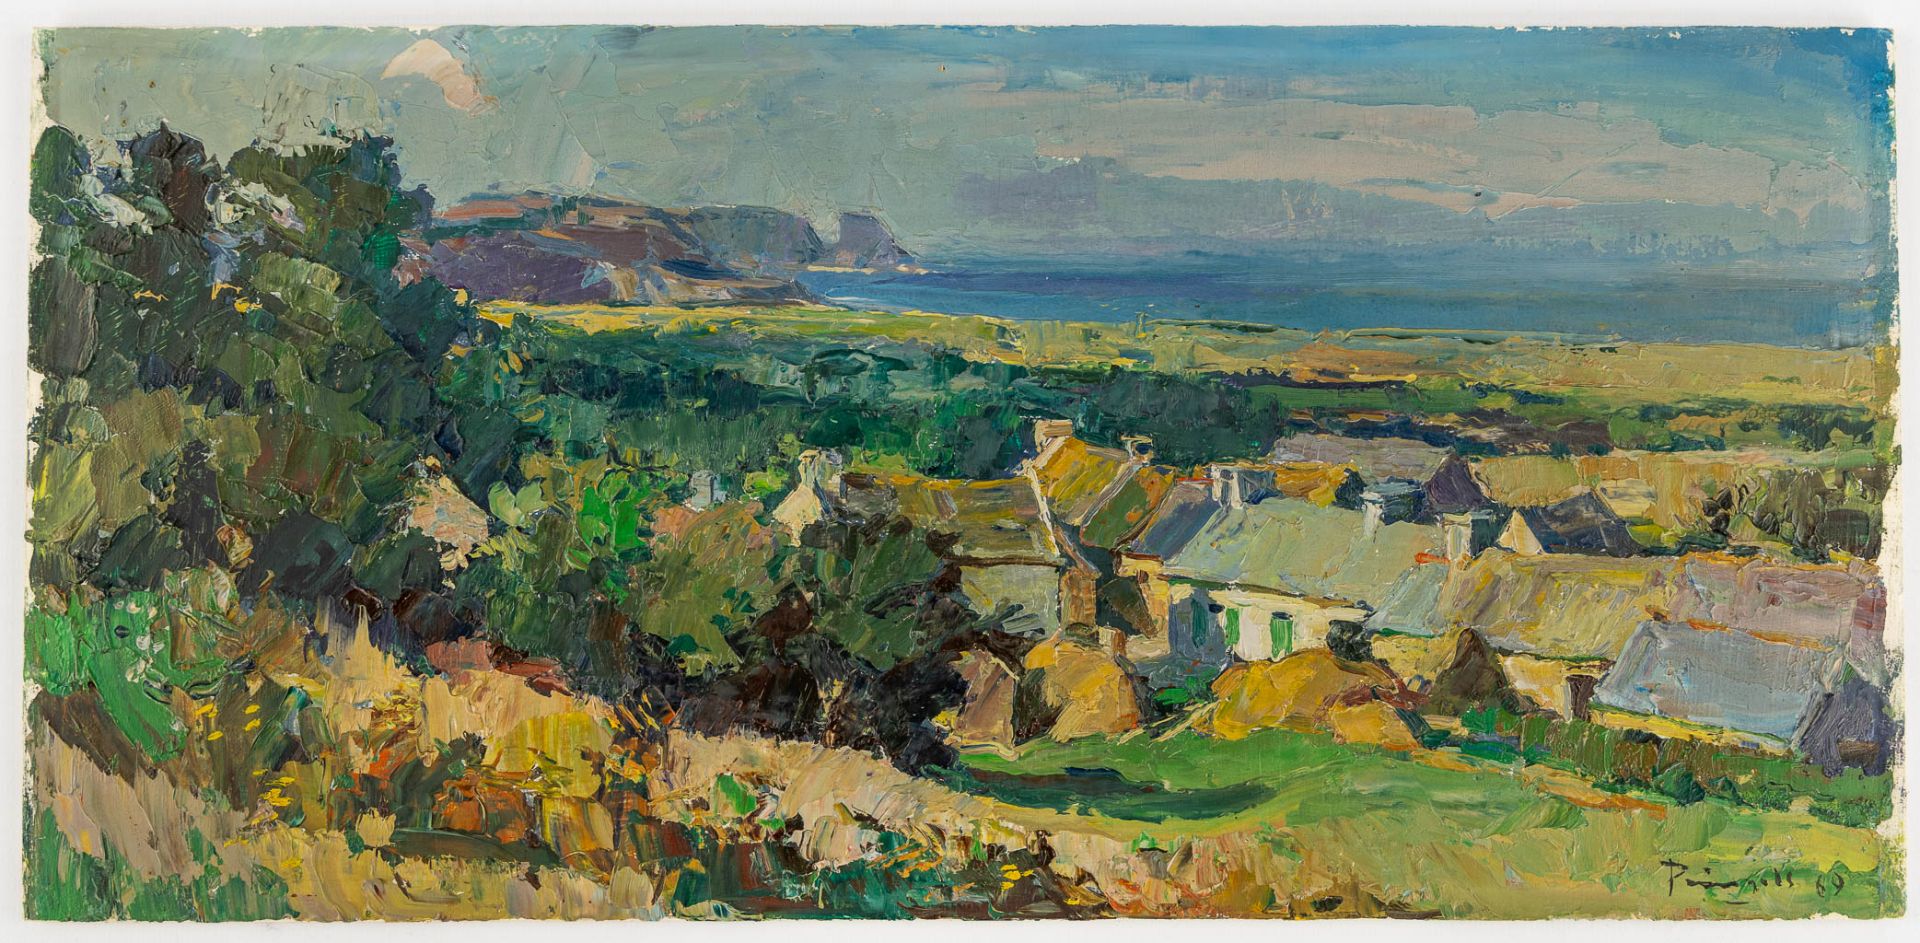 Leo PRINGELS (1901-1992) 'Lansdscape of the Normandic coast' oil on board. (W:46 x H:22 cm) - Image 3 of 7